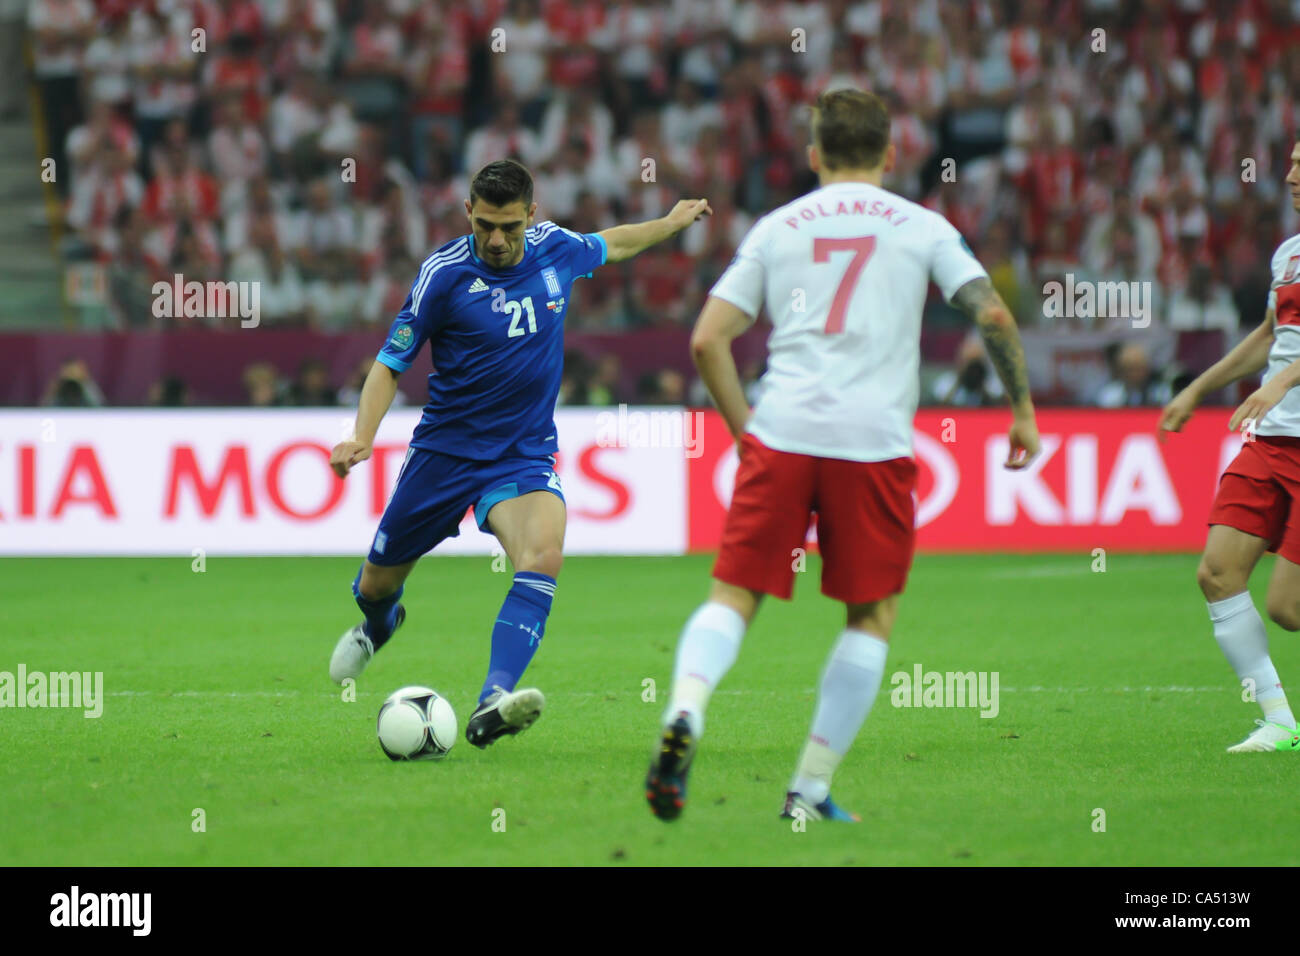 08.06.2012 Warsaw, Poland. Kostas Katsouranis (Panathinaikos FC) in action for Greece during the European Championship Group A game between Poland and Greece from the National Stadium. Stock Photo